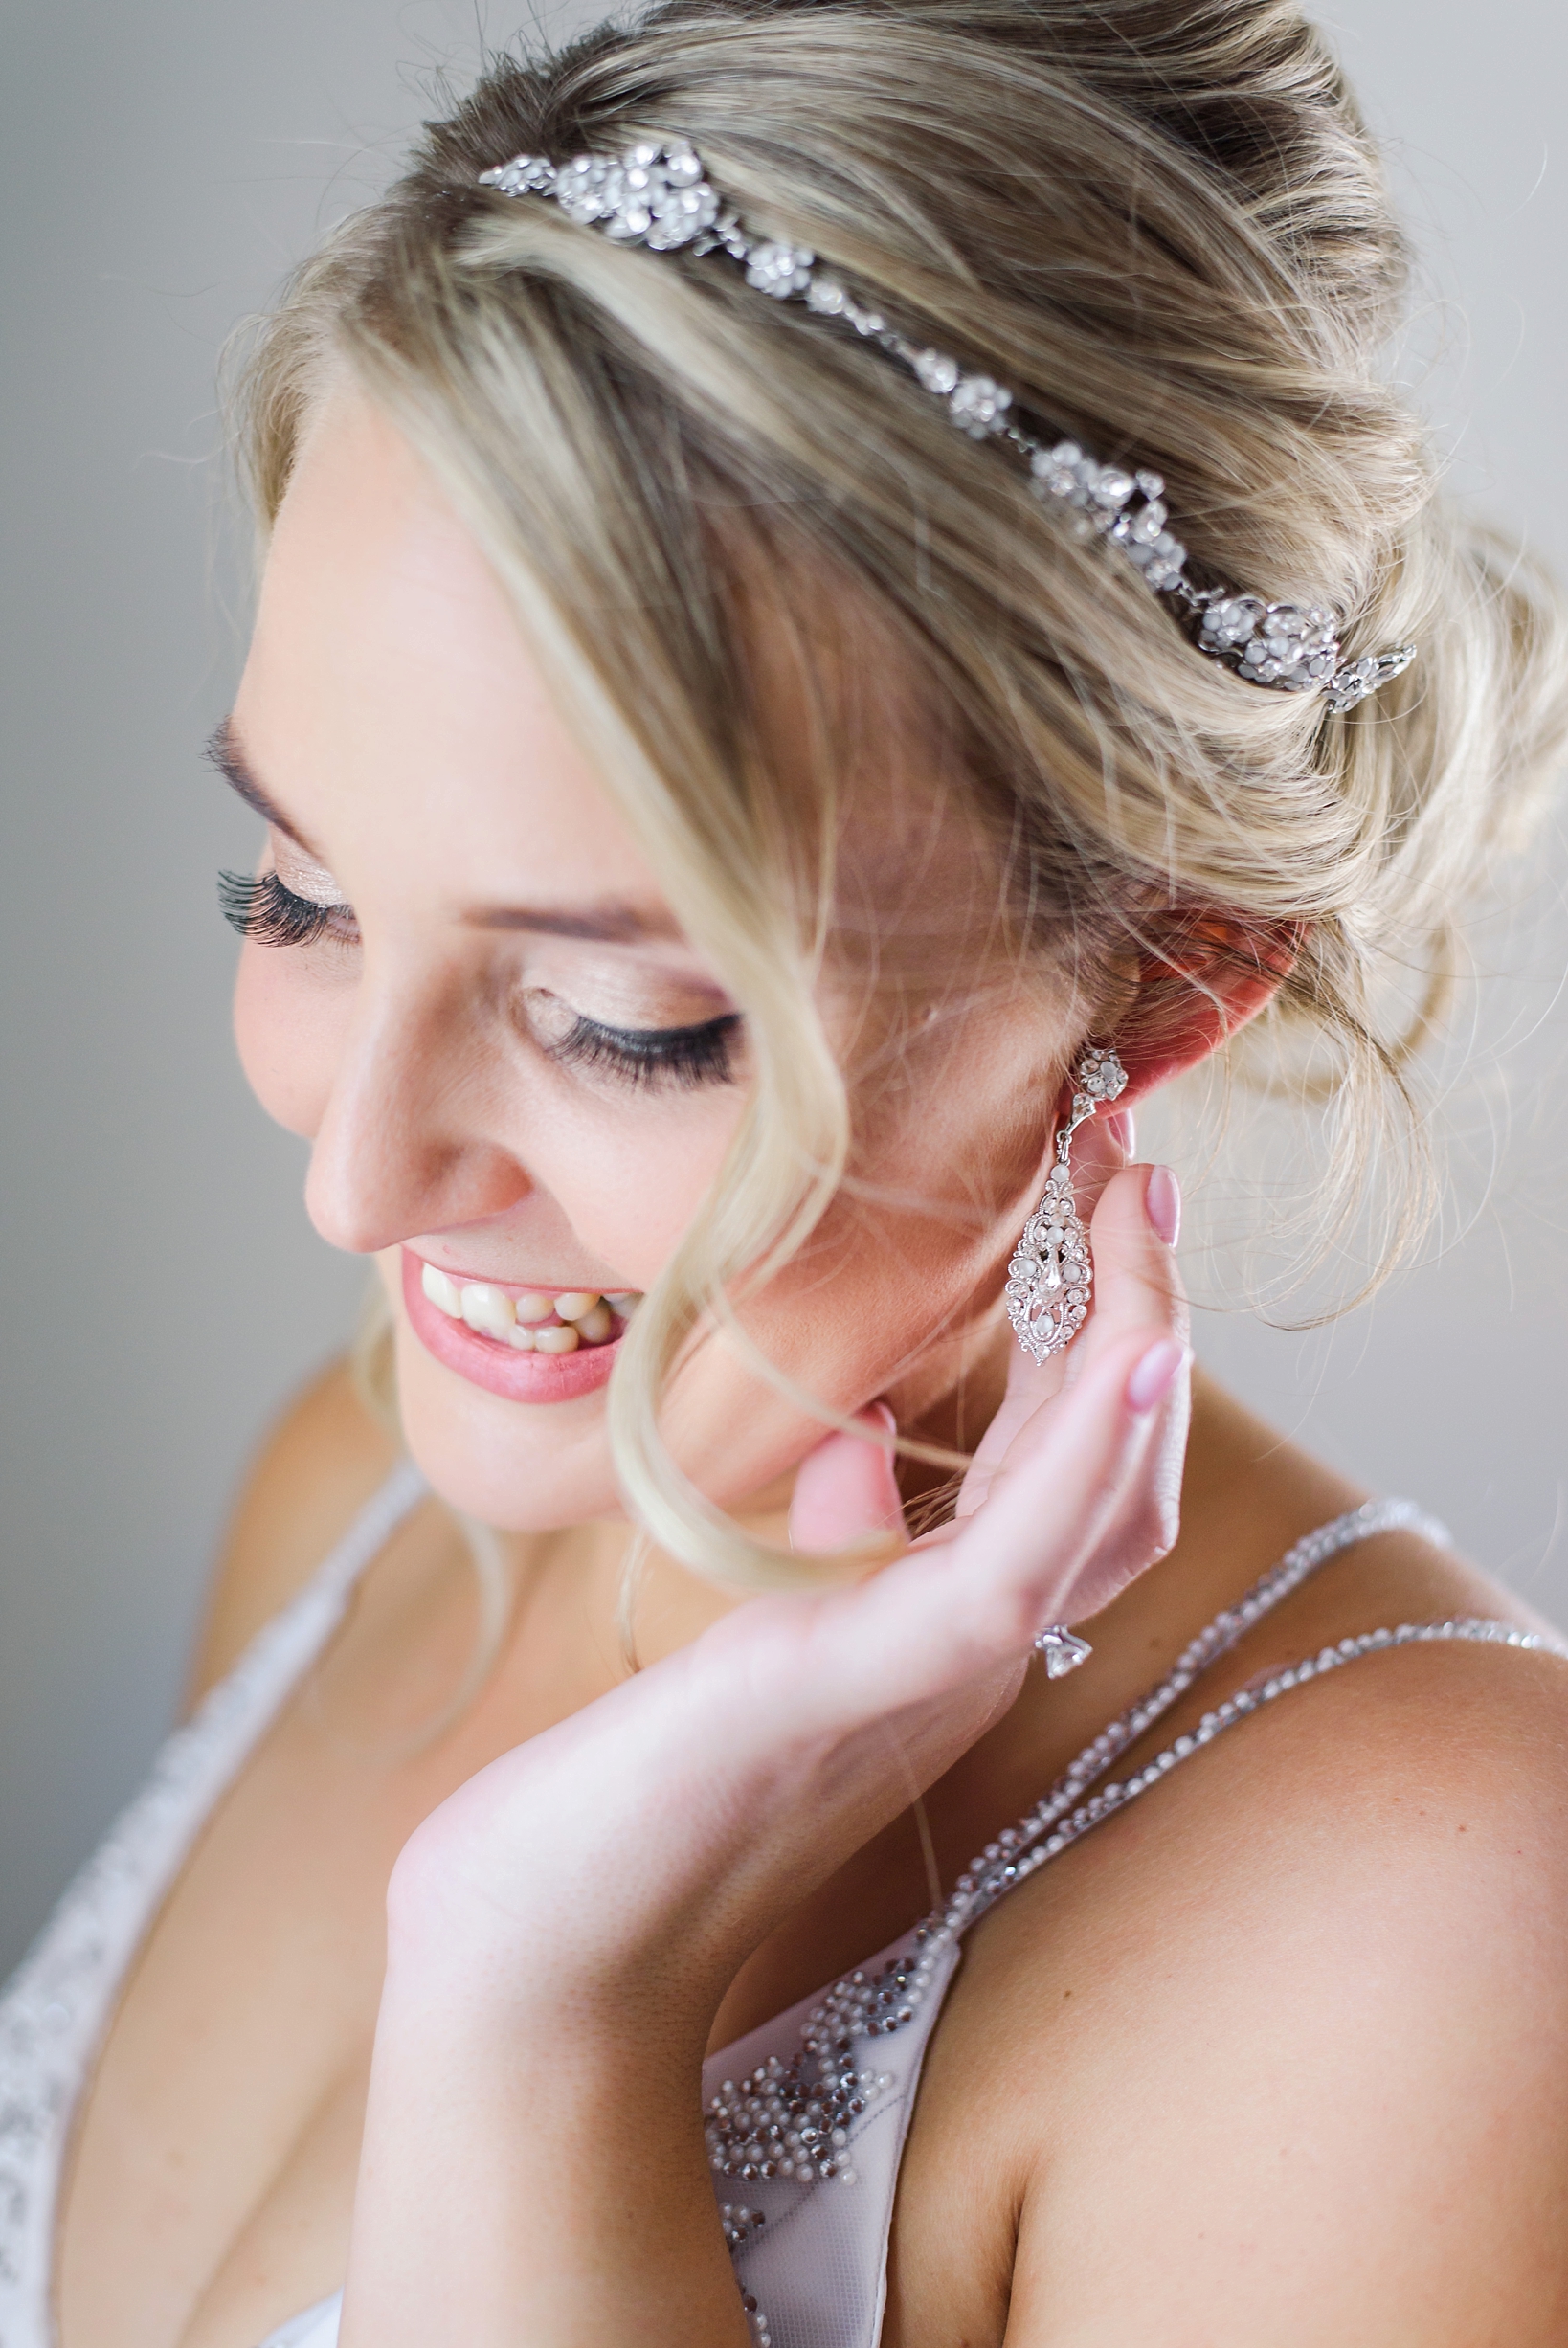 Bride with her diamond headband and matching earrings